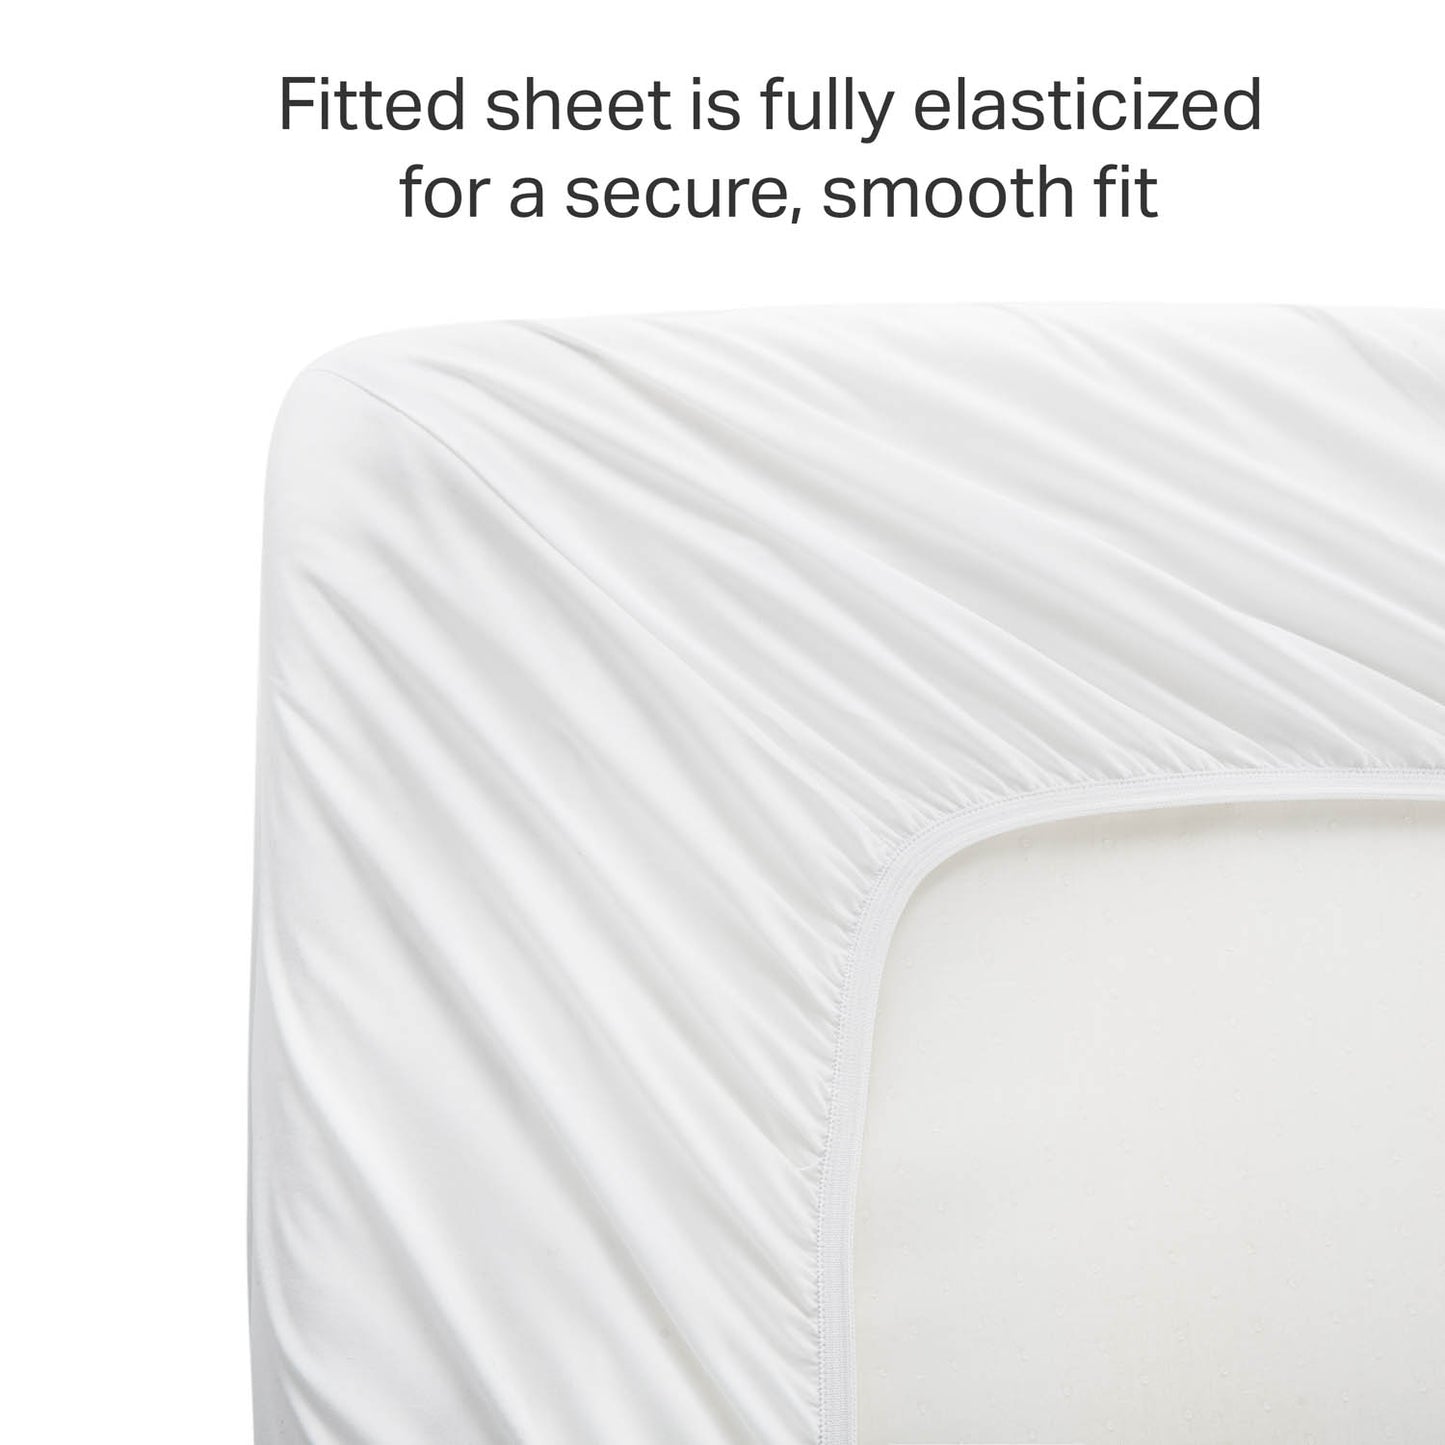 Weekender Hotel Fitted Sheet, Full XL, White